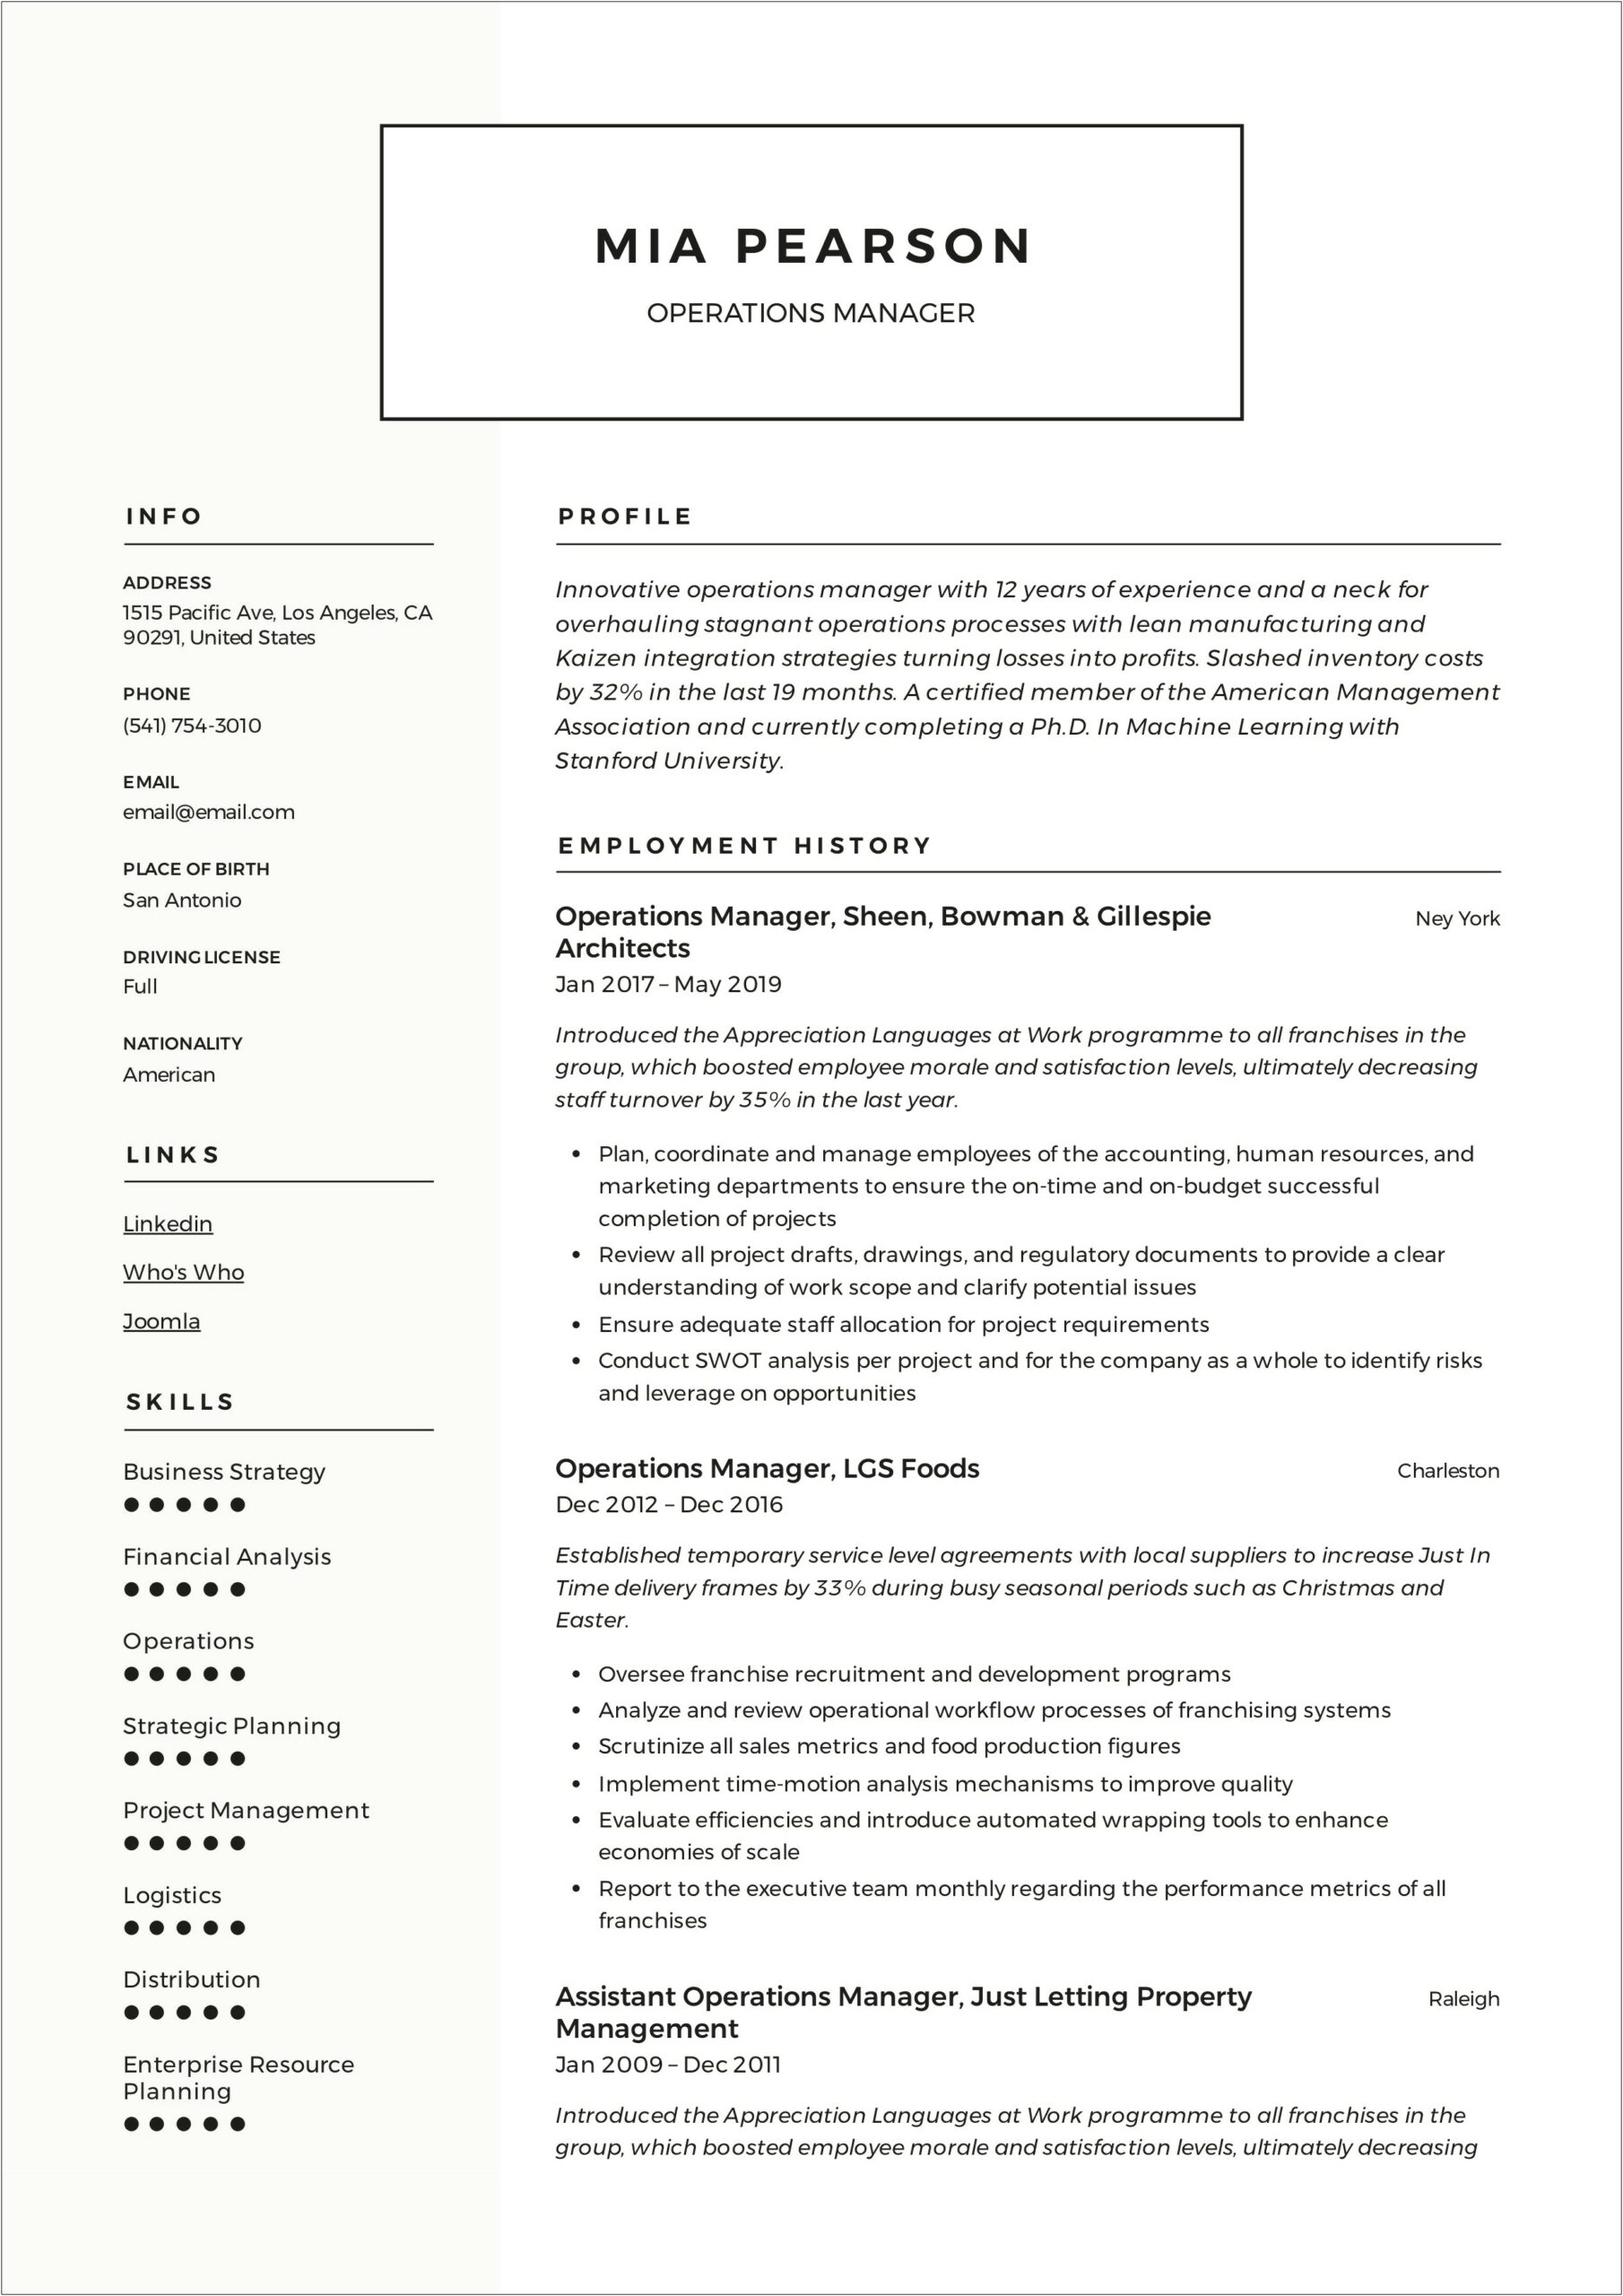 Sample Resume For Branch Operations Manager